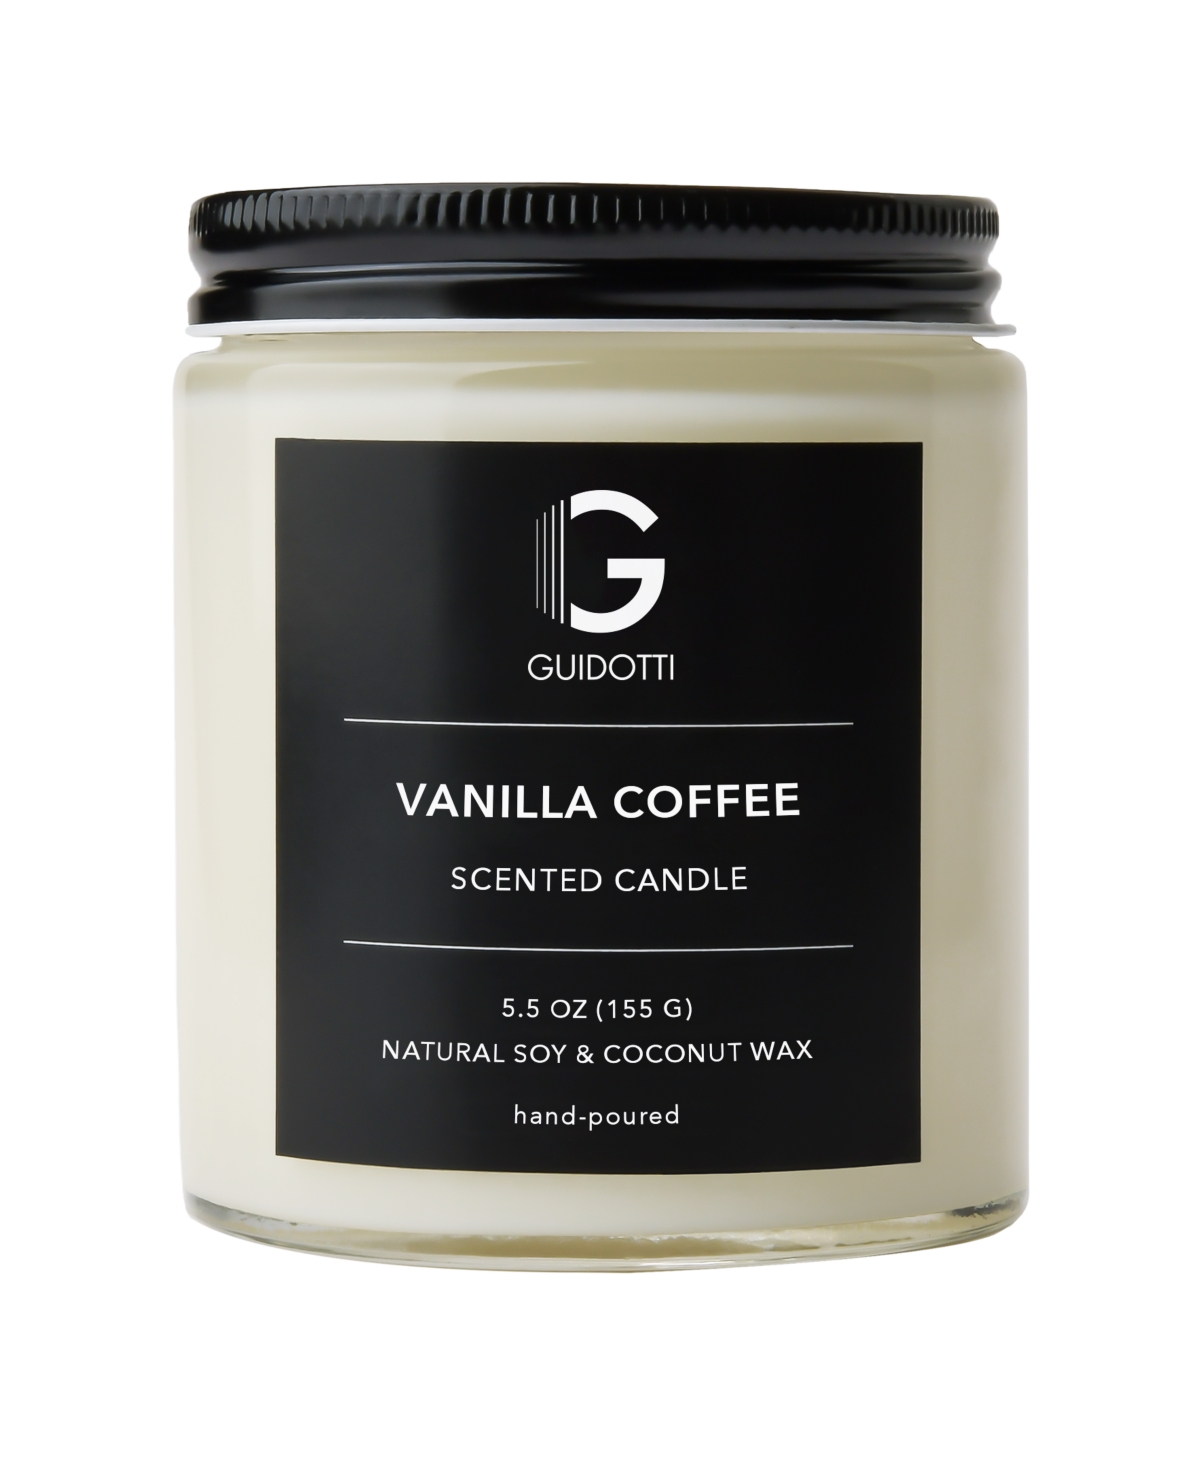 Vanilla Coffee Scented Candle, 1-Wick, 5.5 oz